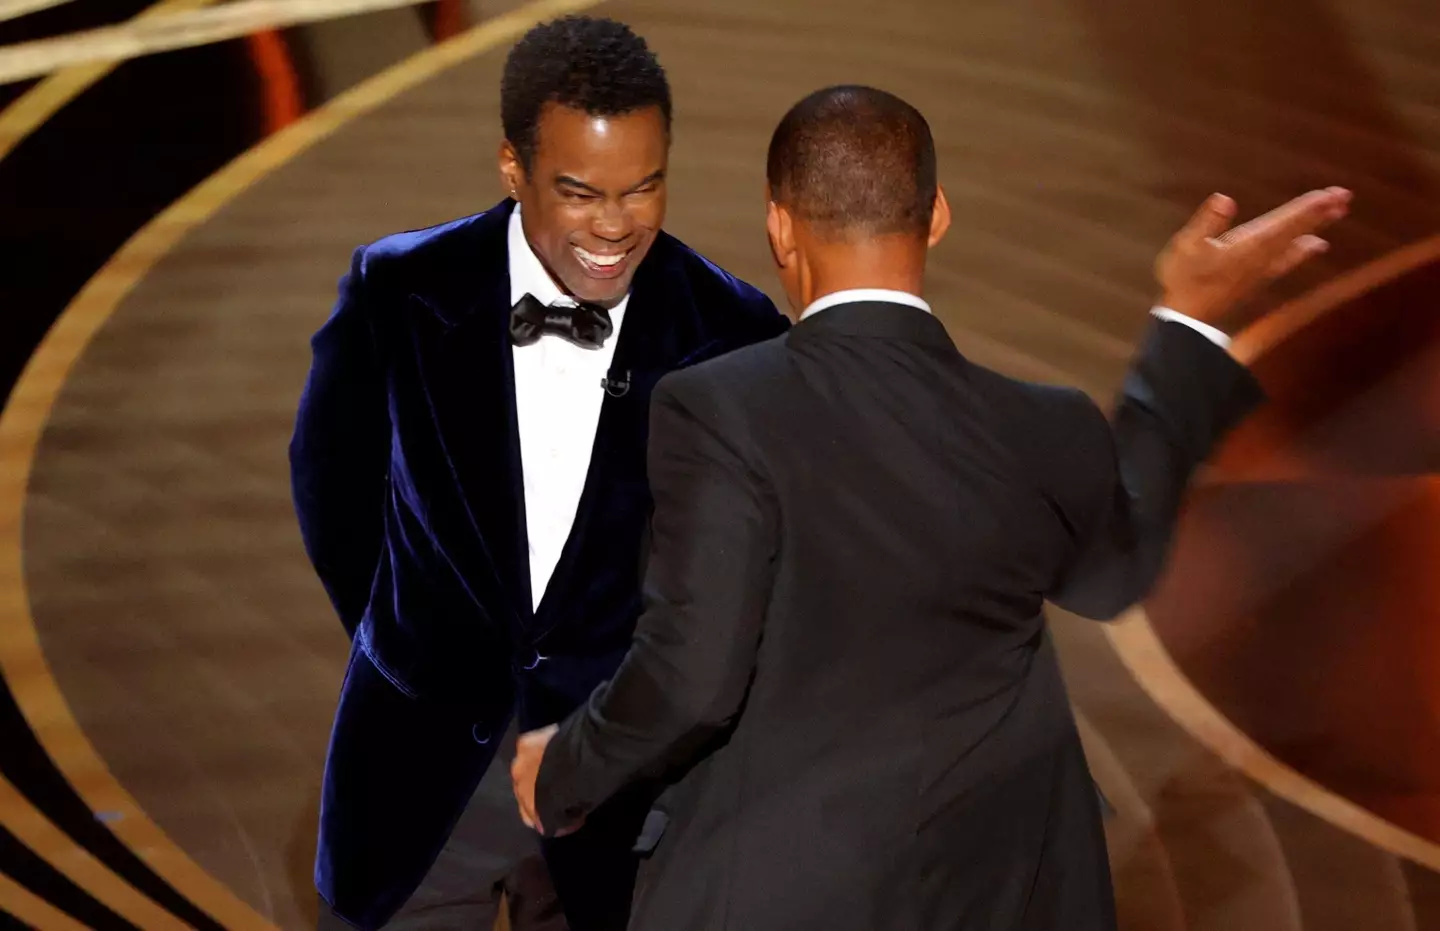 Will Smith apologised for the slap, but he's not getting back in to the Oscars for at least ten years.